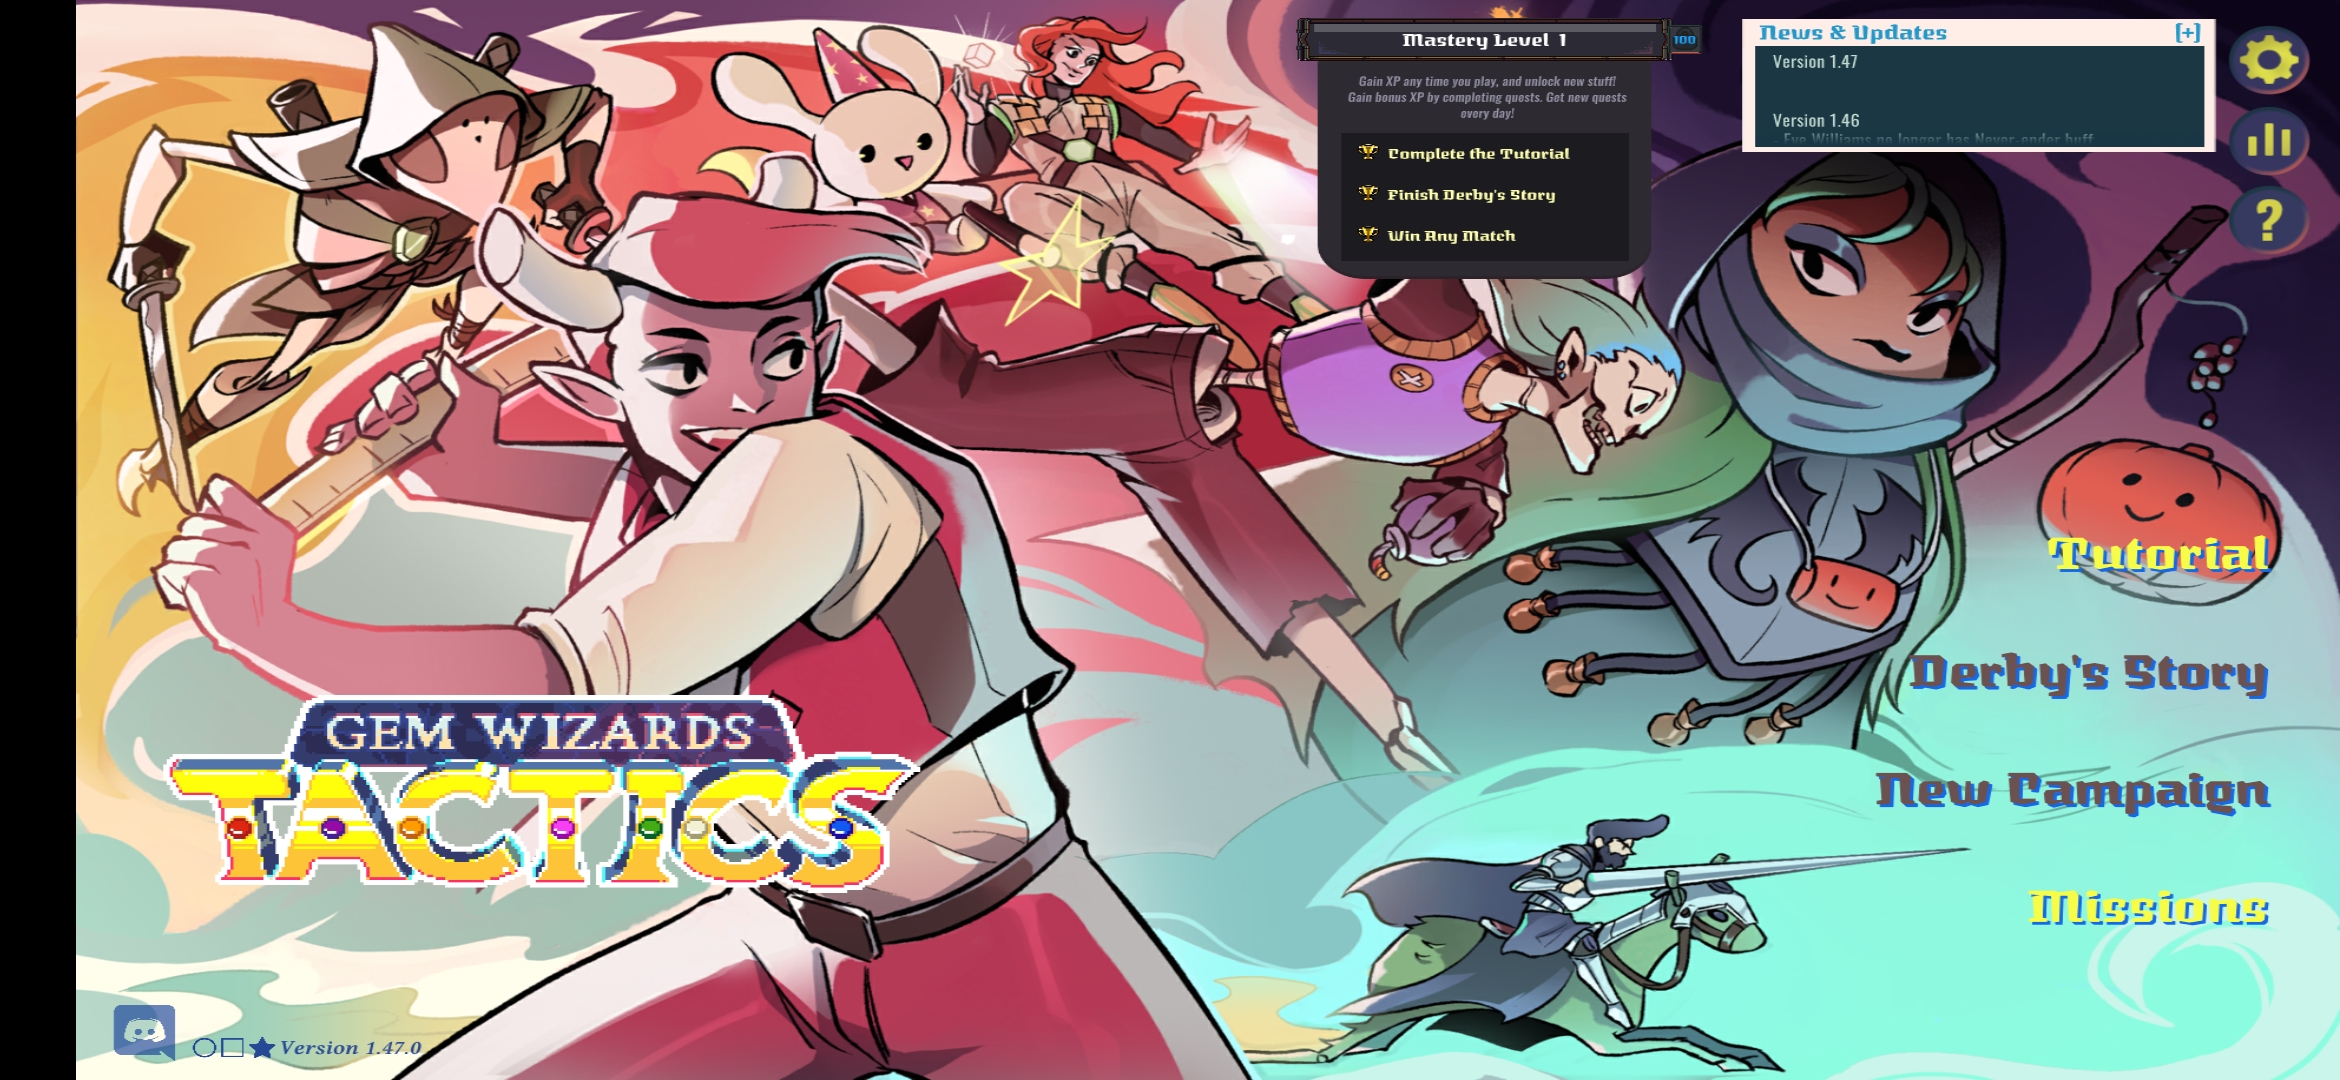 Game Gem Wizards Tactics Cho Android